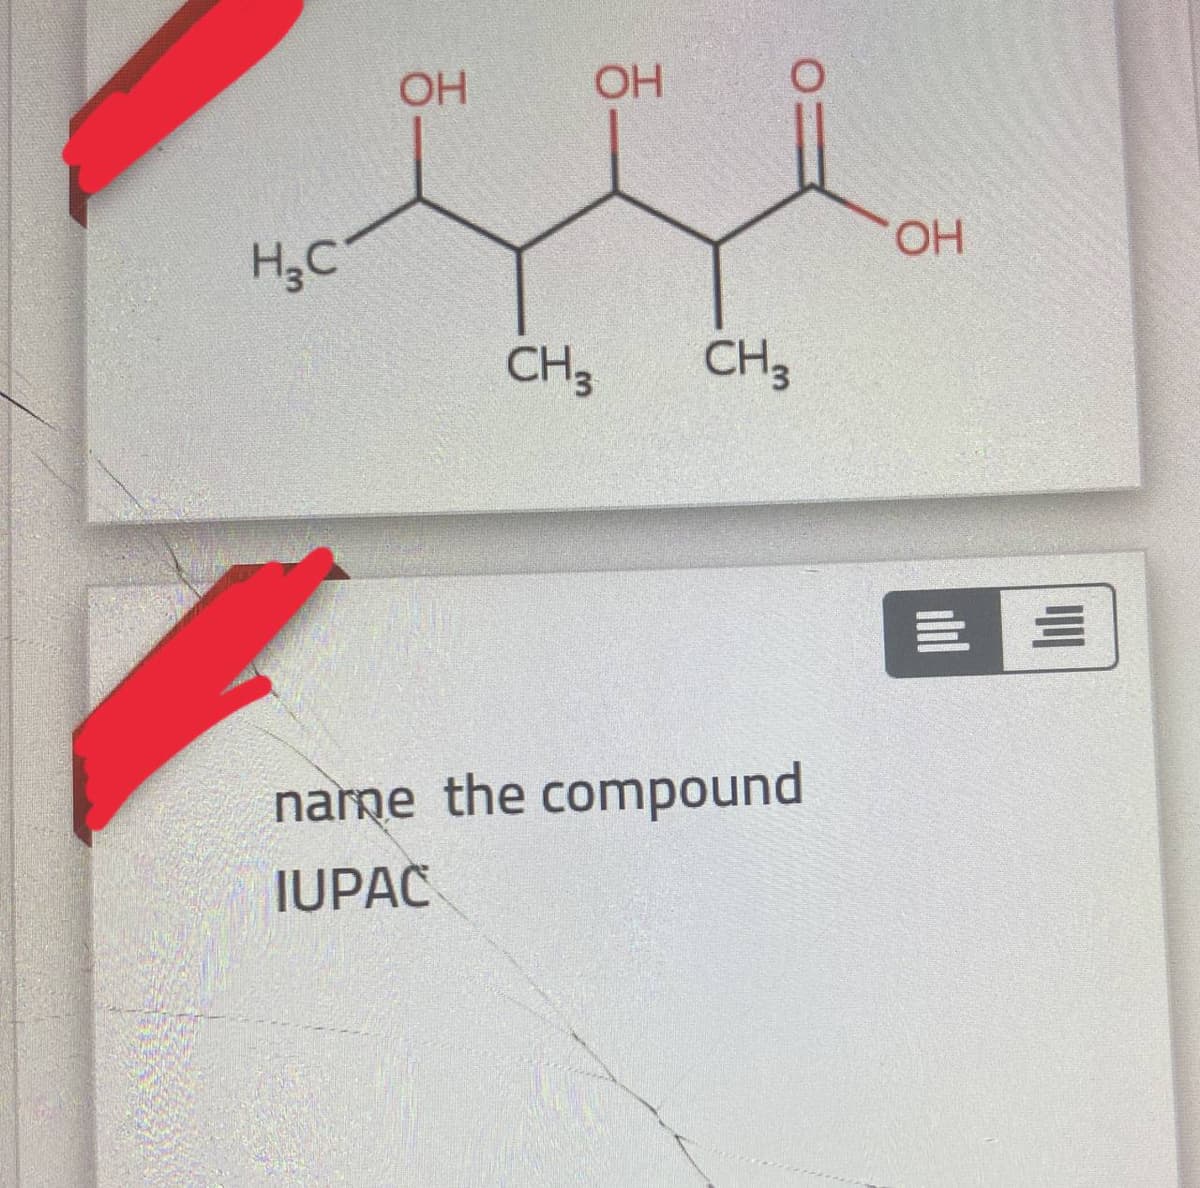 OH
OH
H3C
HO.
CH3
CH3
narne the compound
IUPAC
